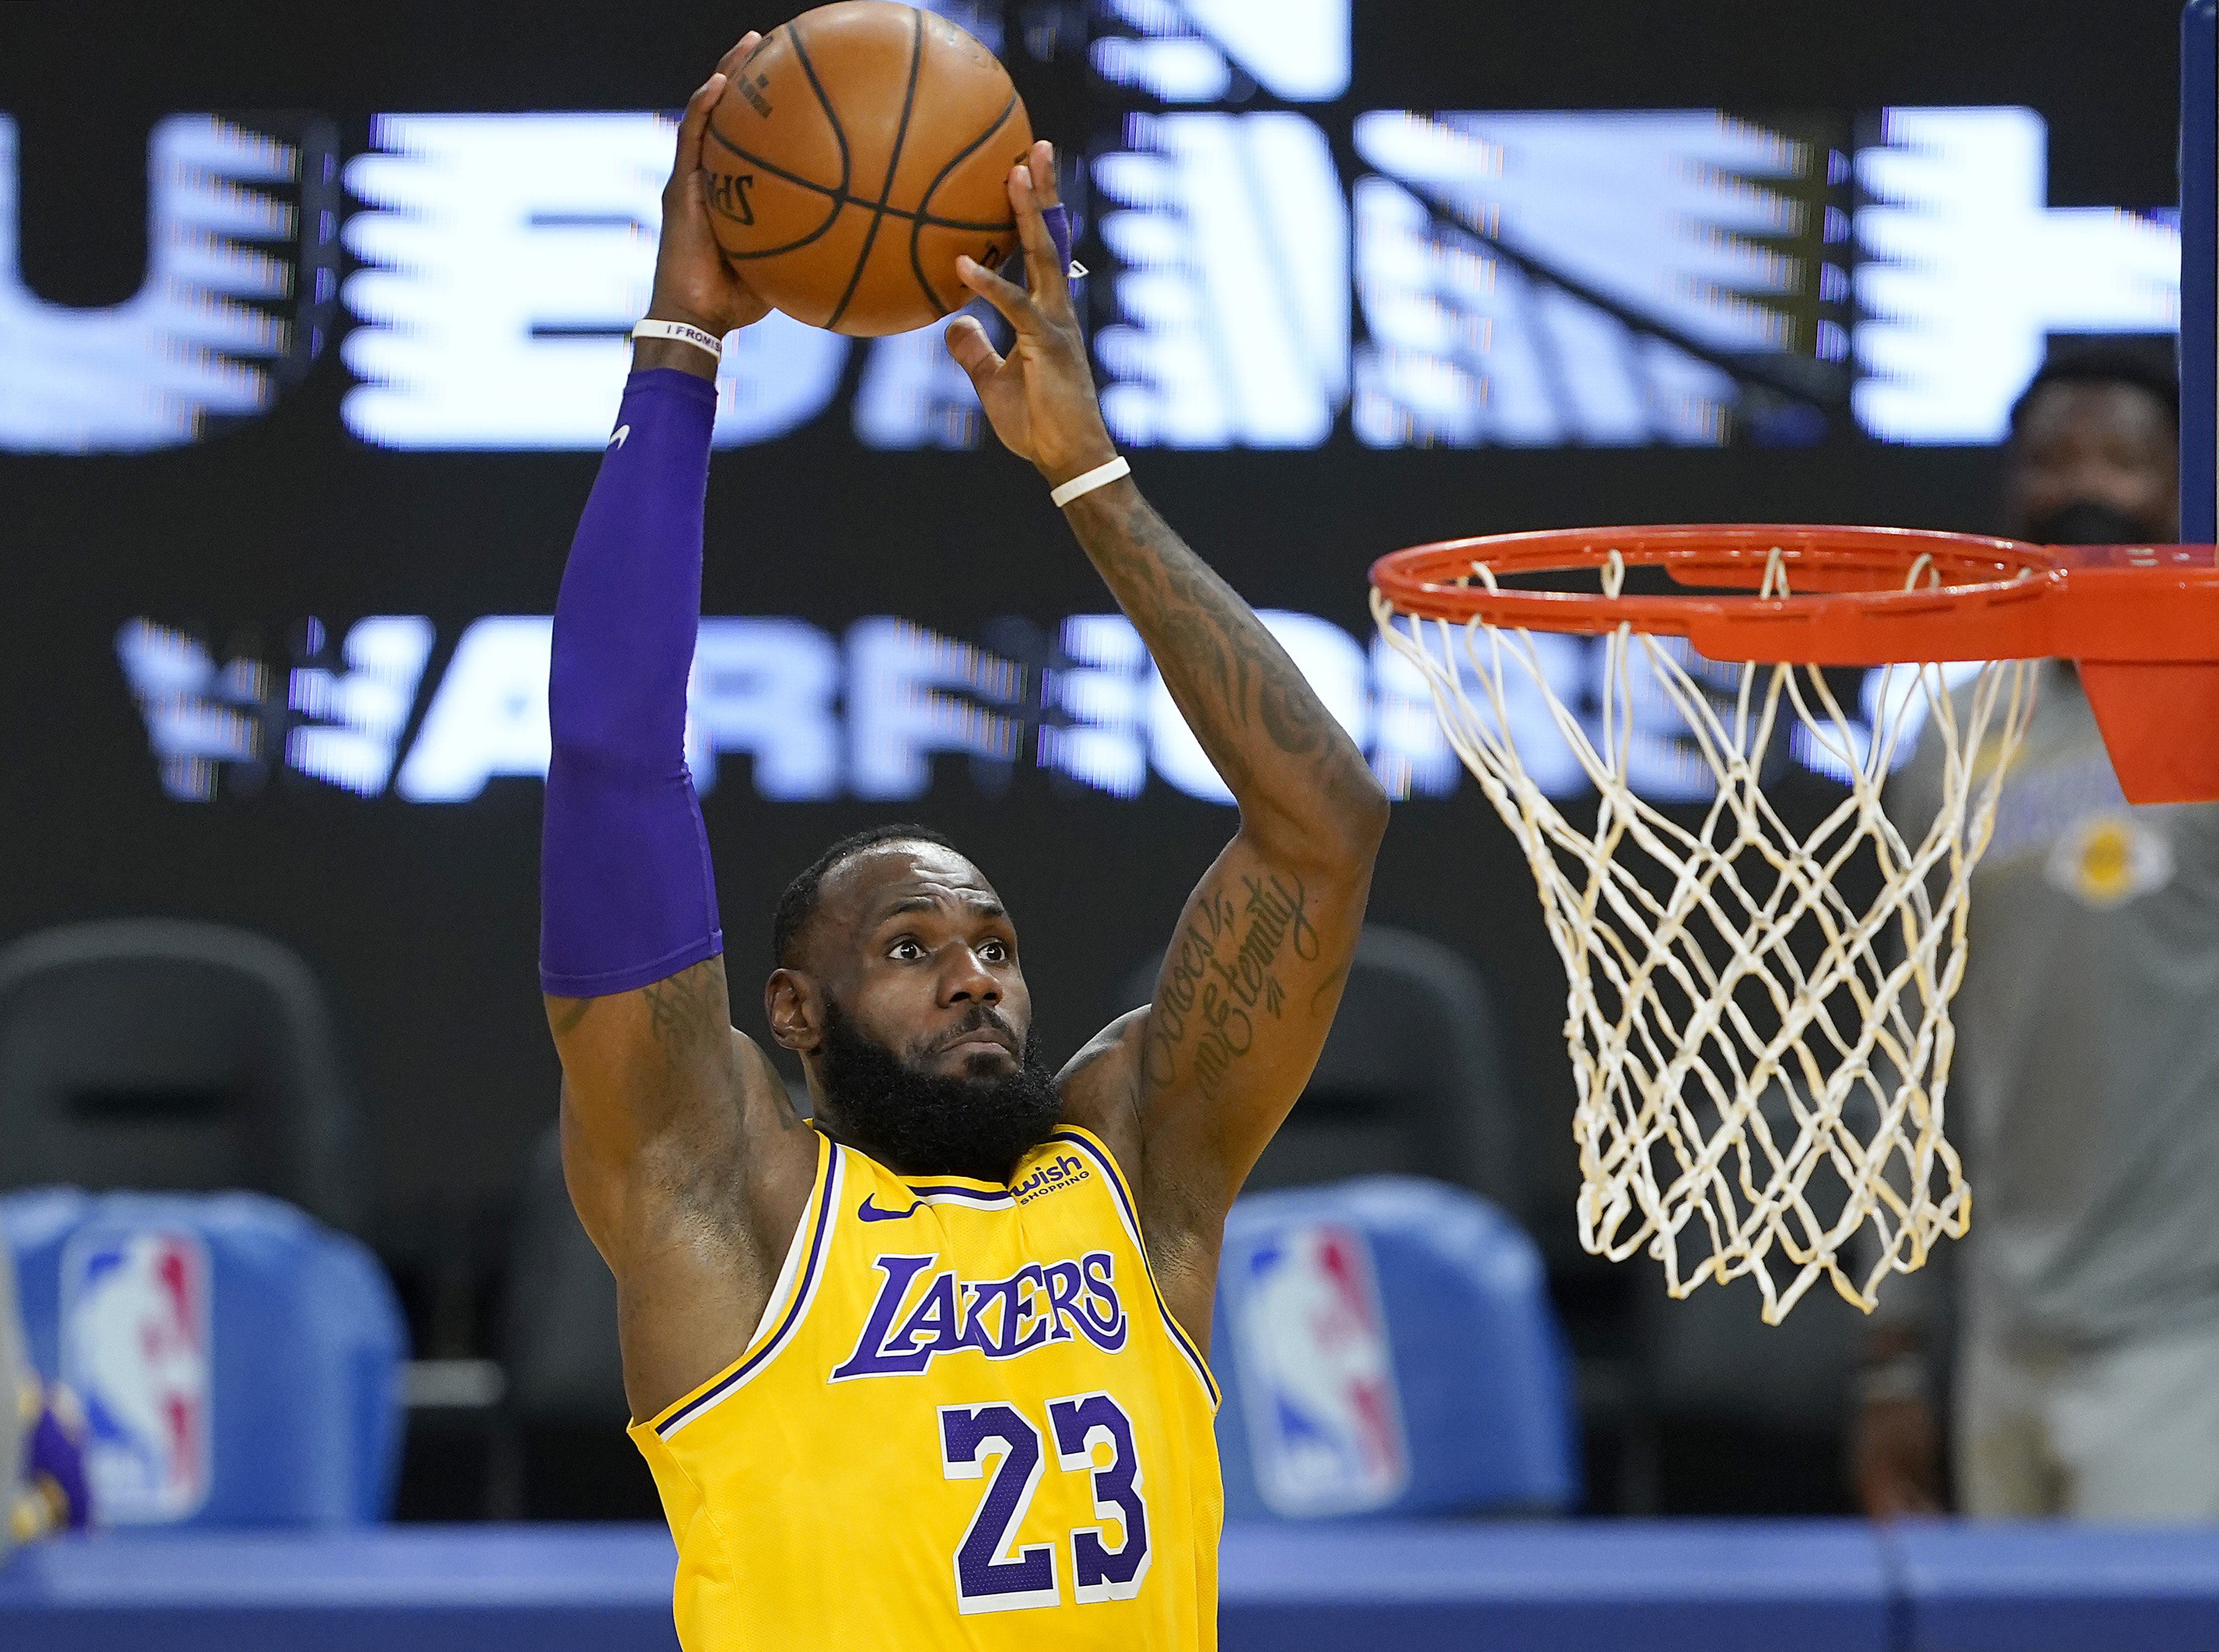 For a Cool $250,000, You Can Own a 13-Second Clip of LeBron James Dunking in NBA Digital Assets